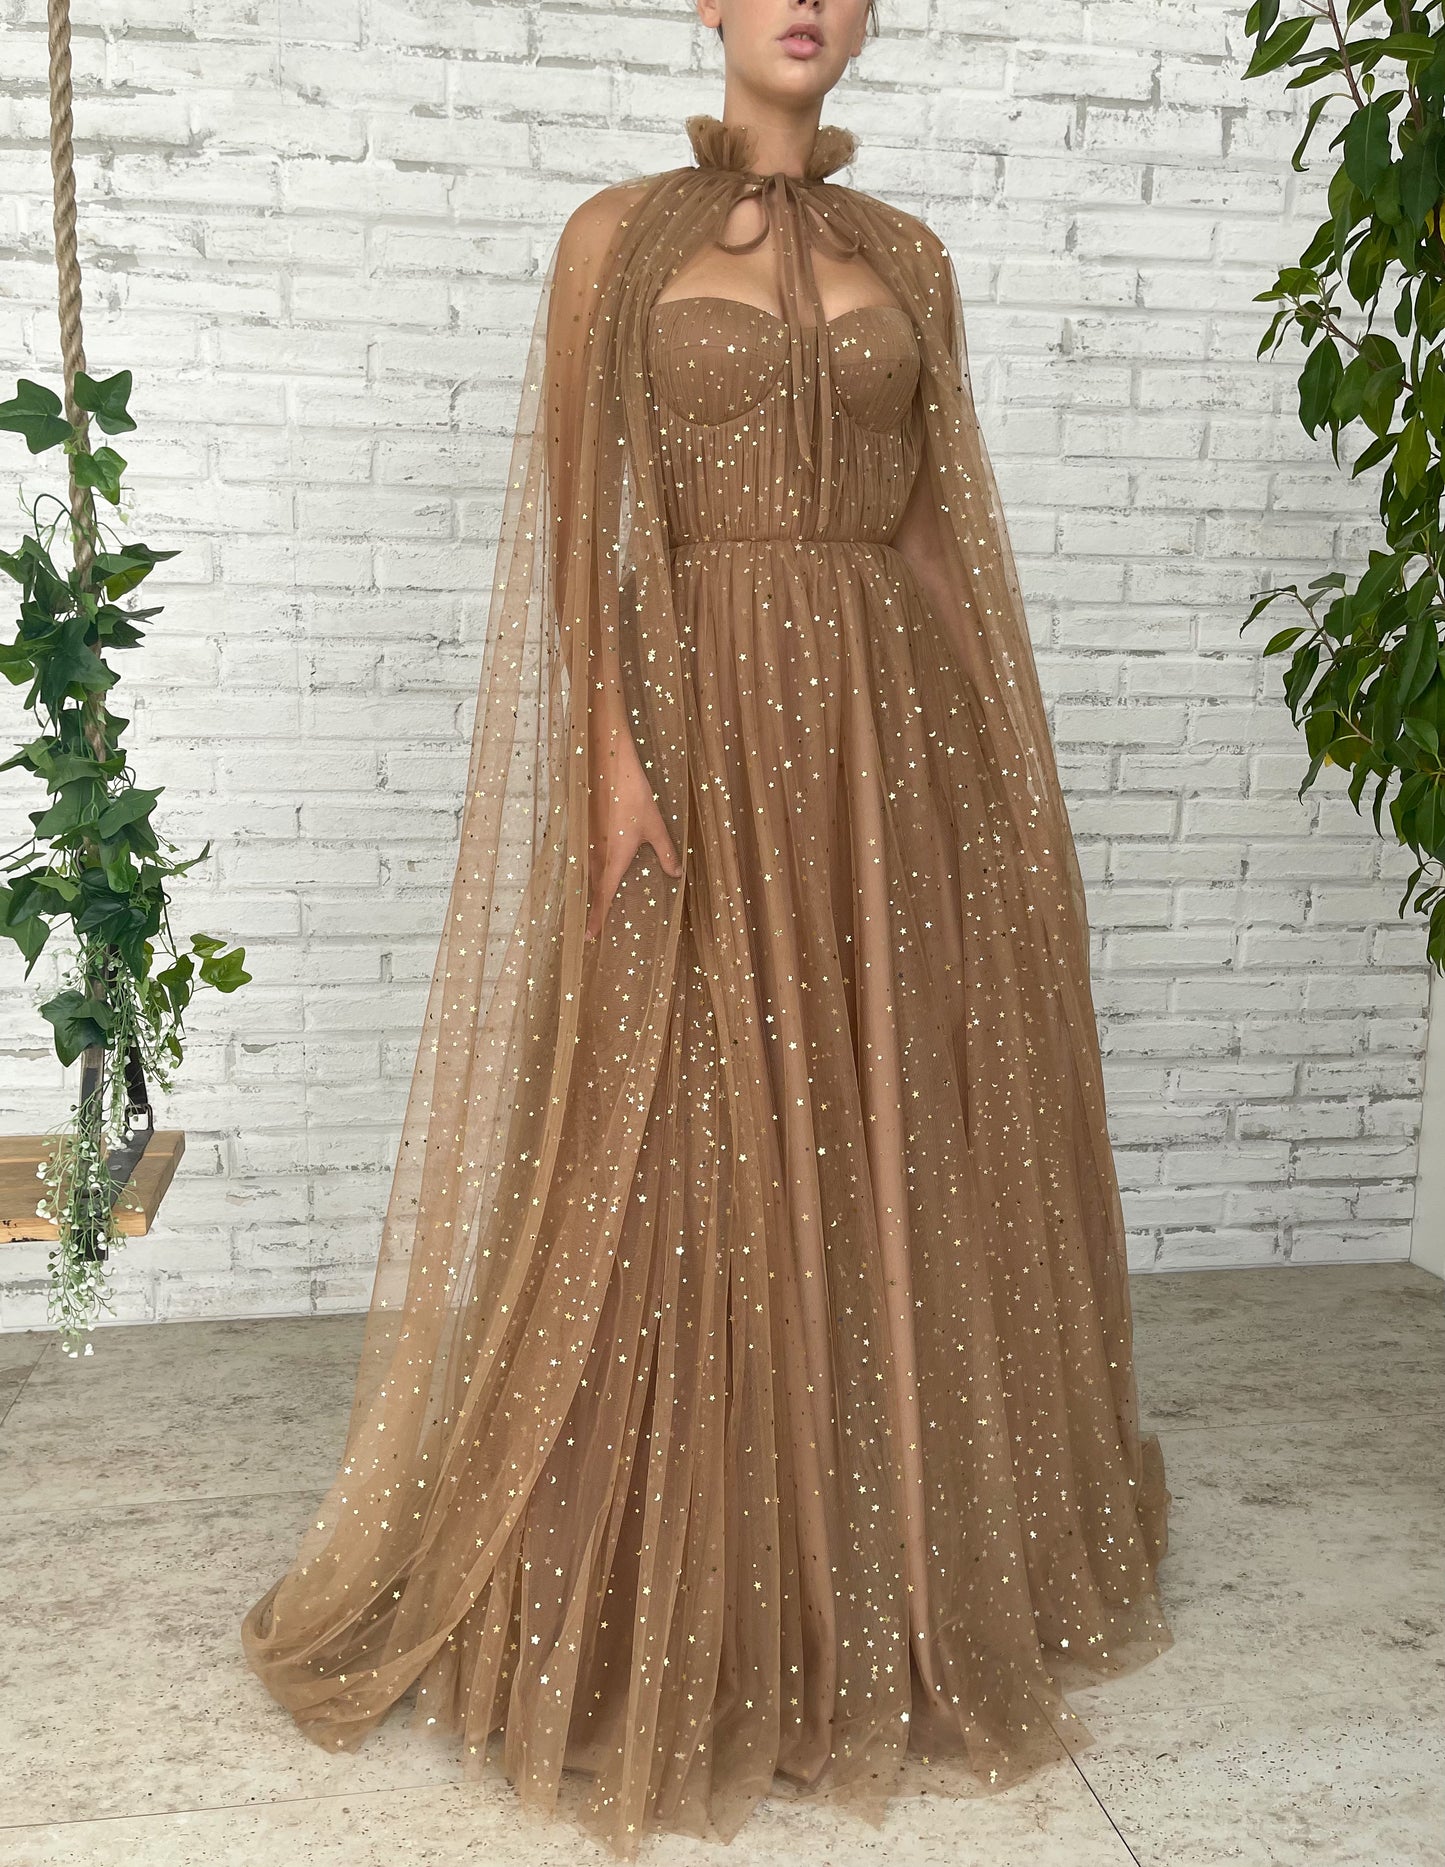 Brown A-Line dress with cape and starry fabric